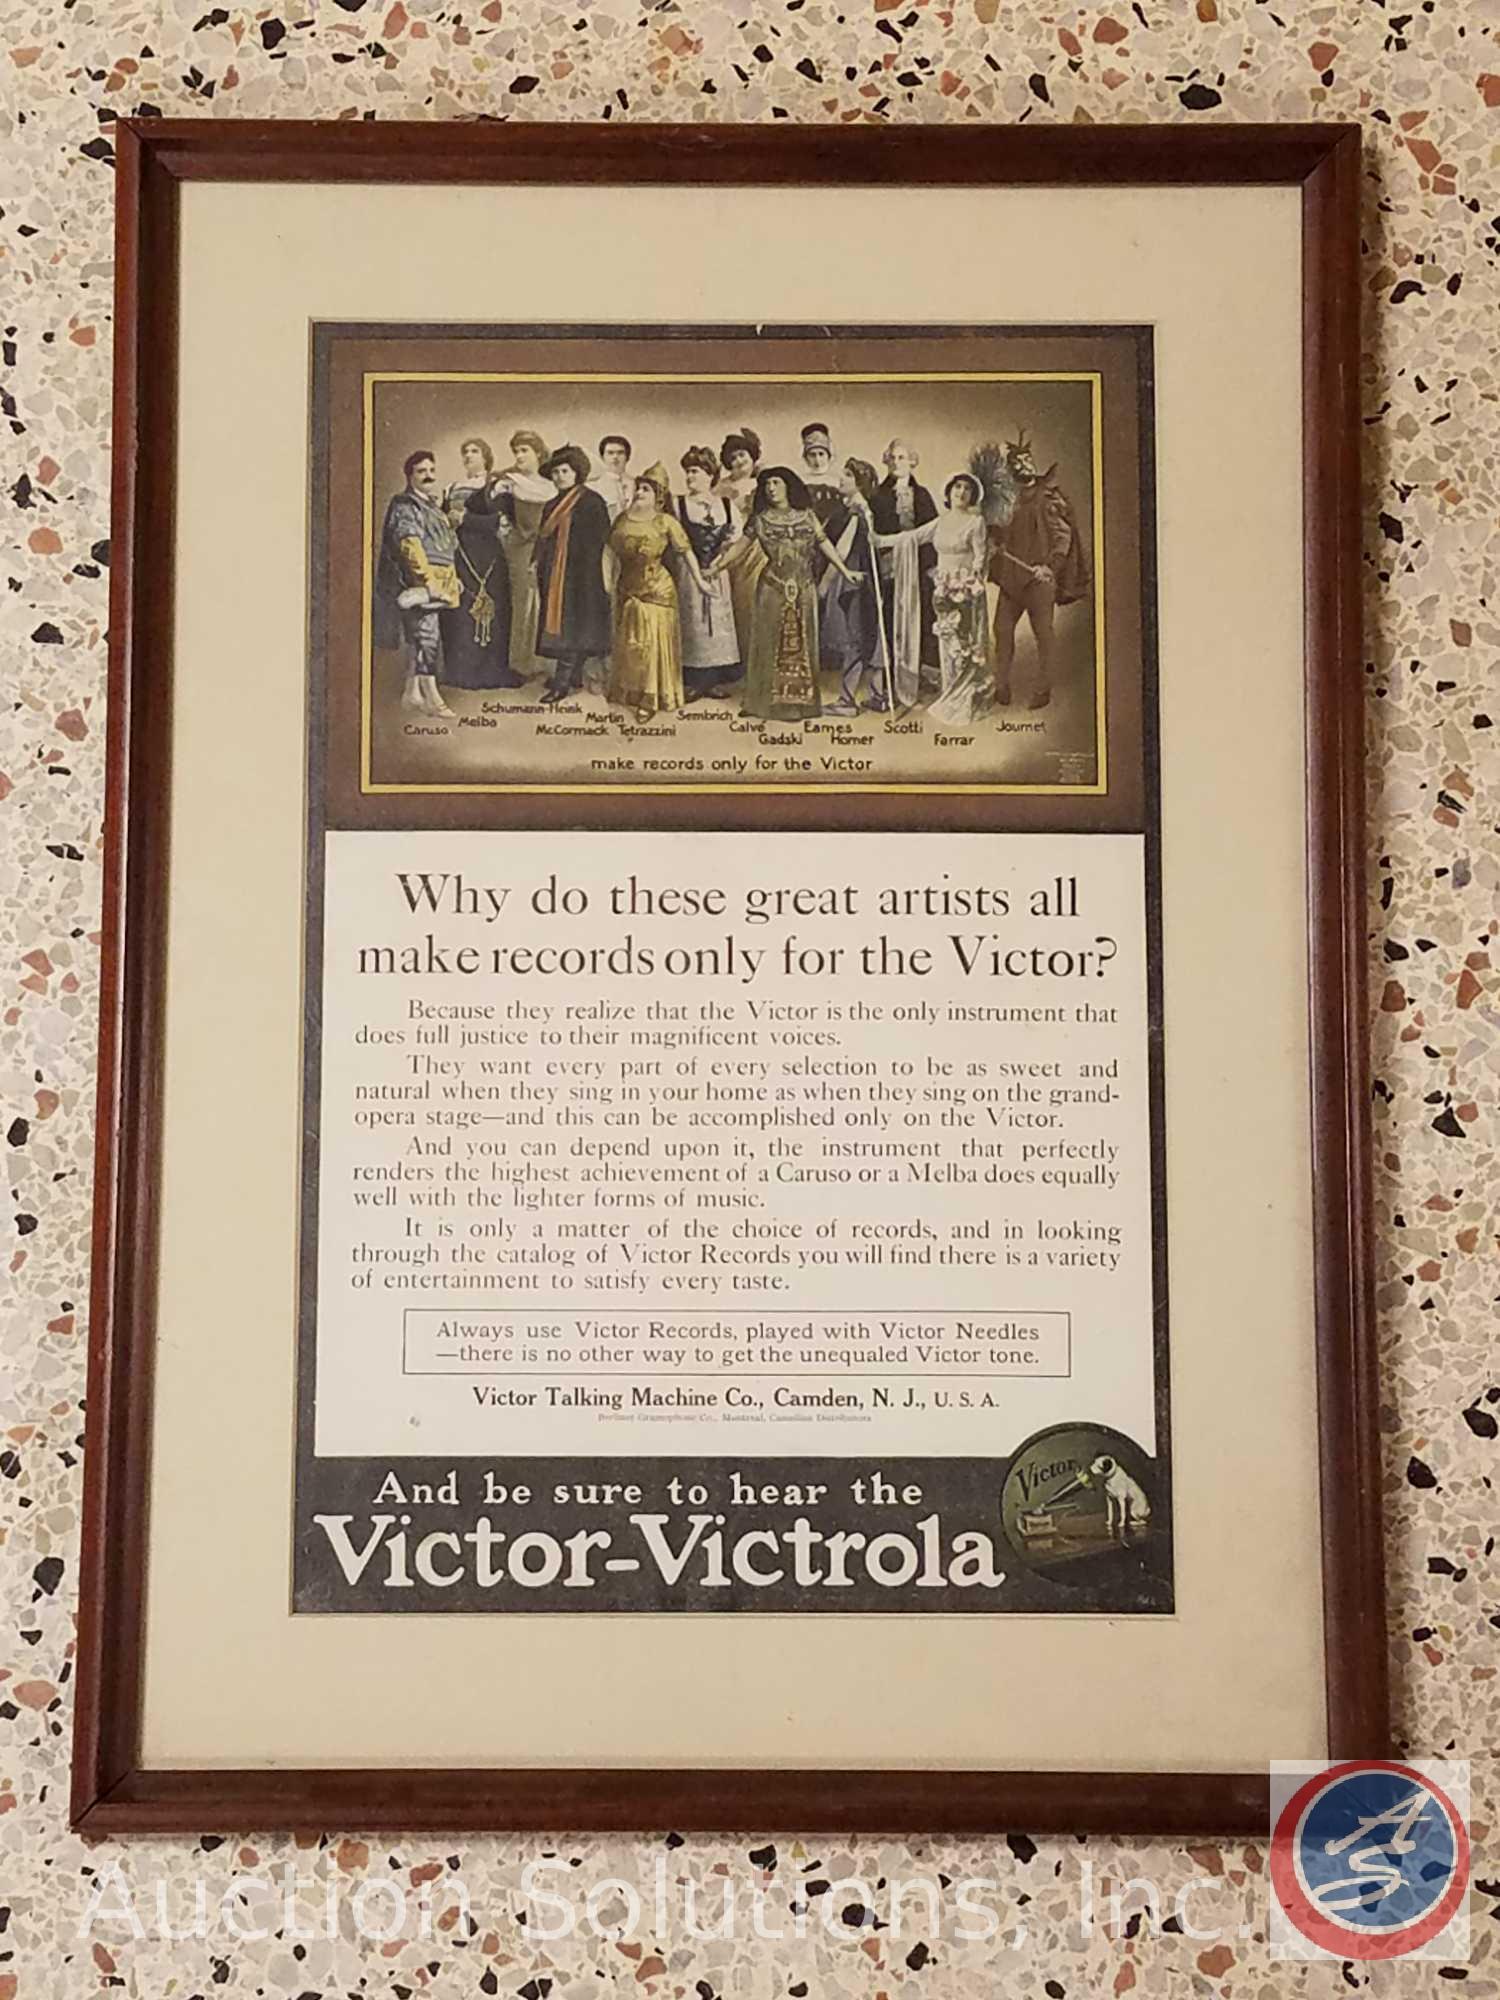 Multiple Victrola Framed Prints Including: Orthophonic Victrola! New! Hear it!, Cheering our Boys in